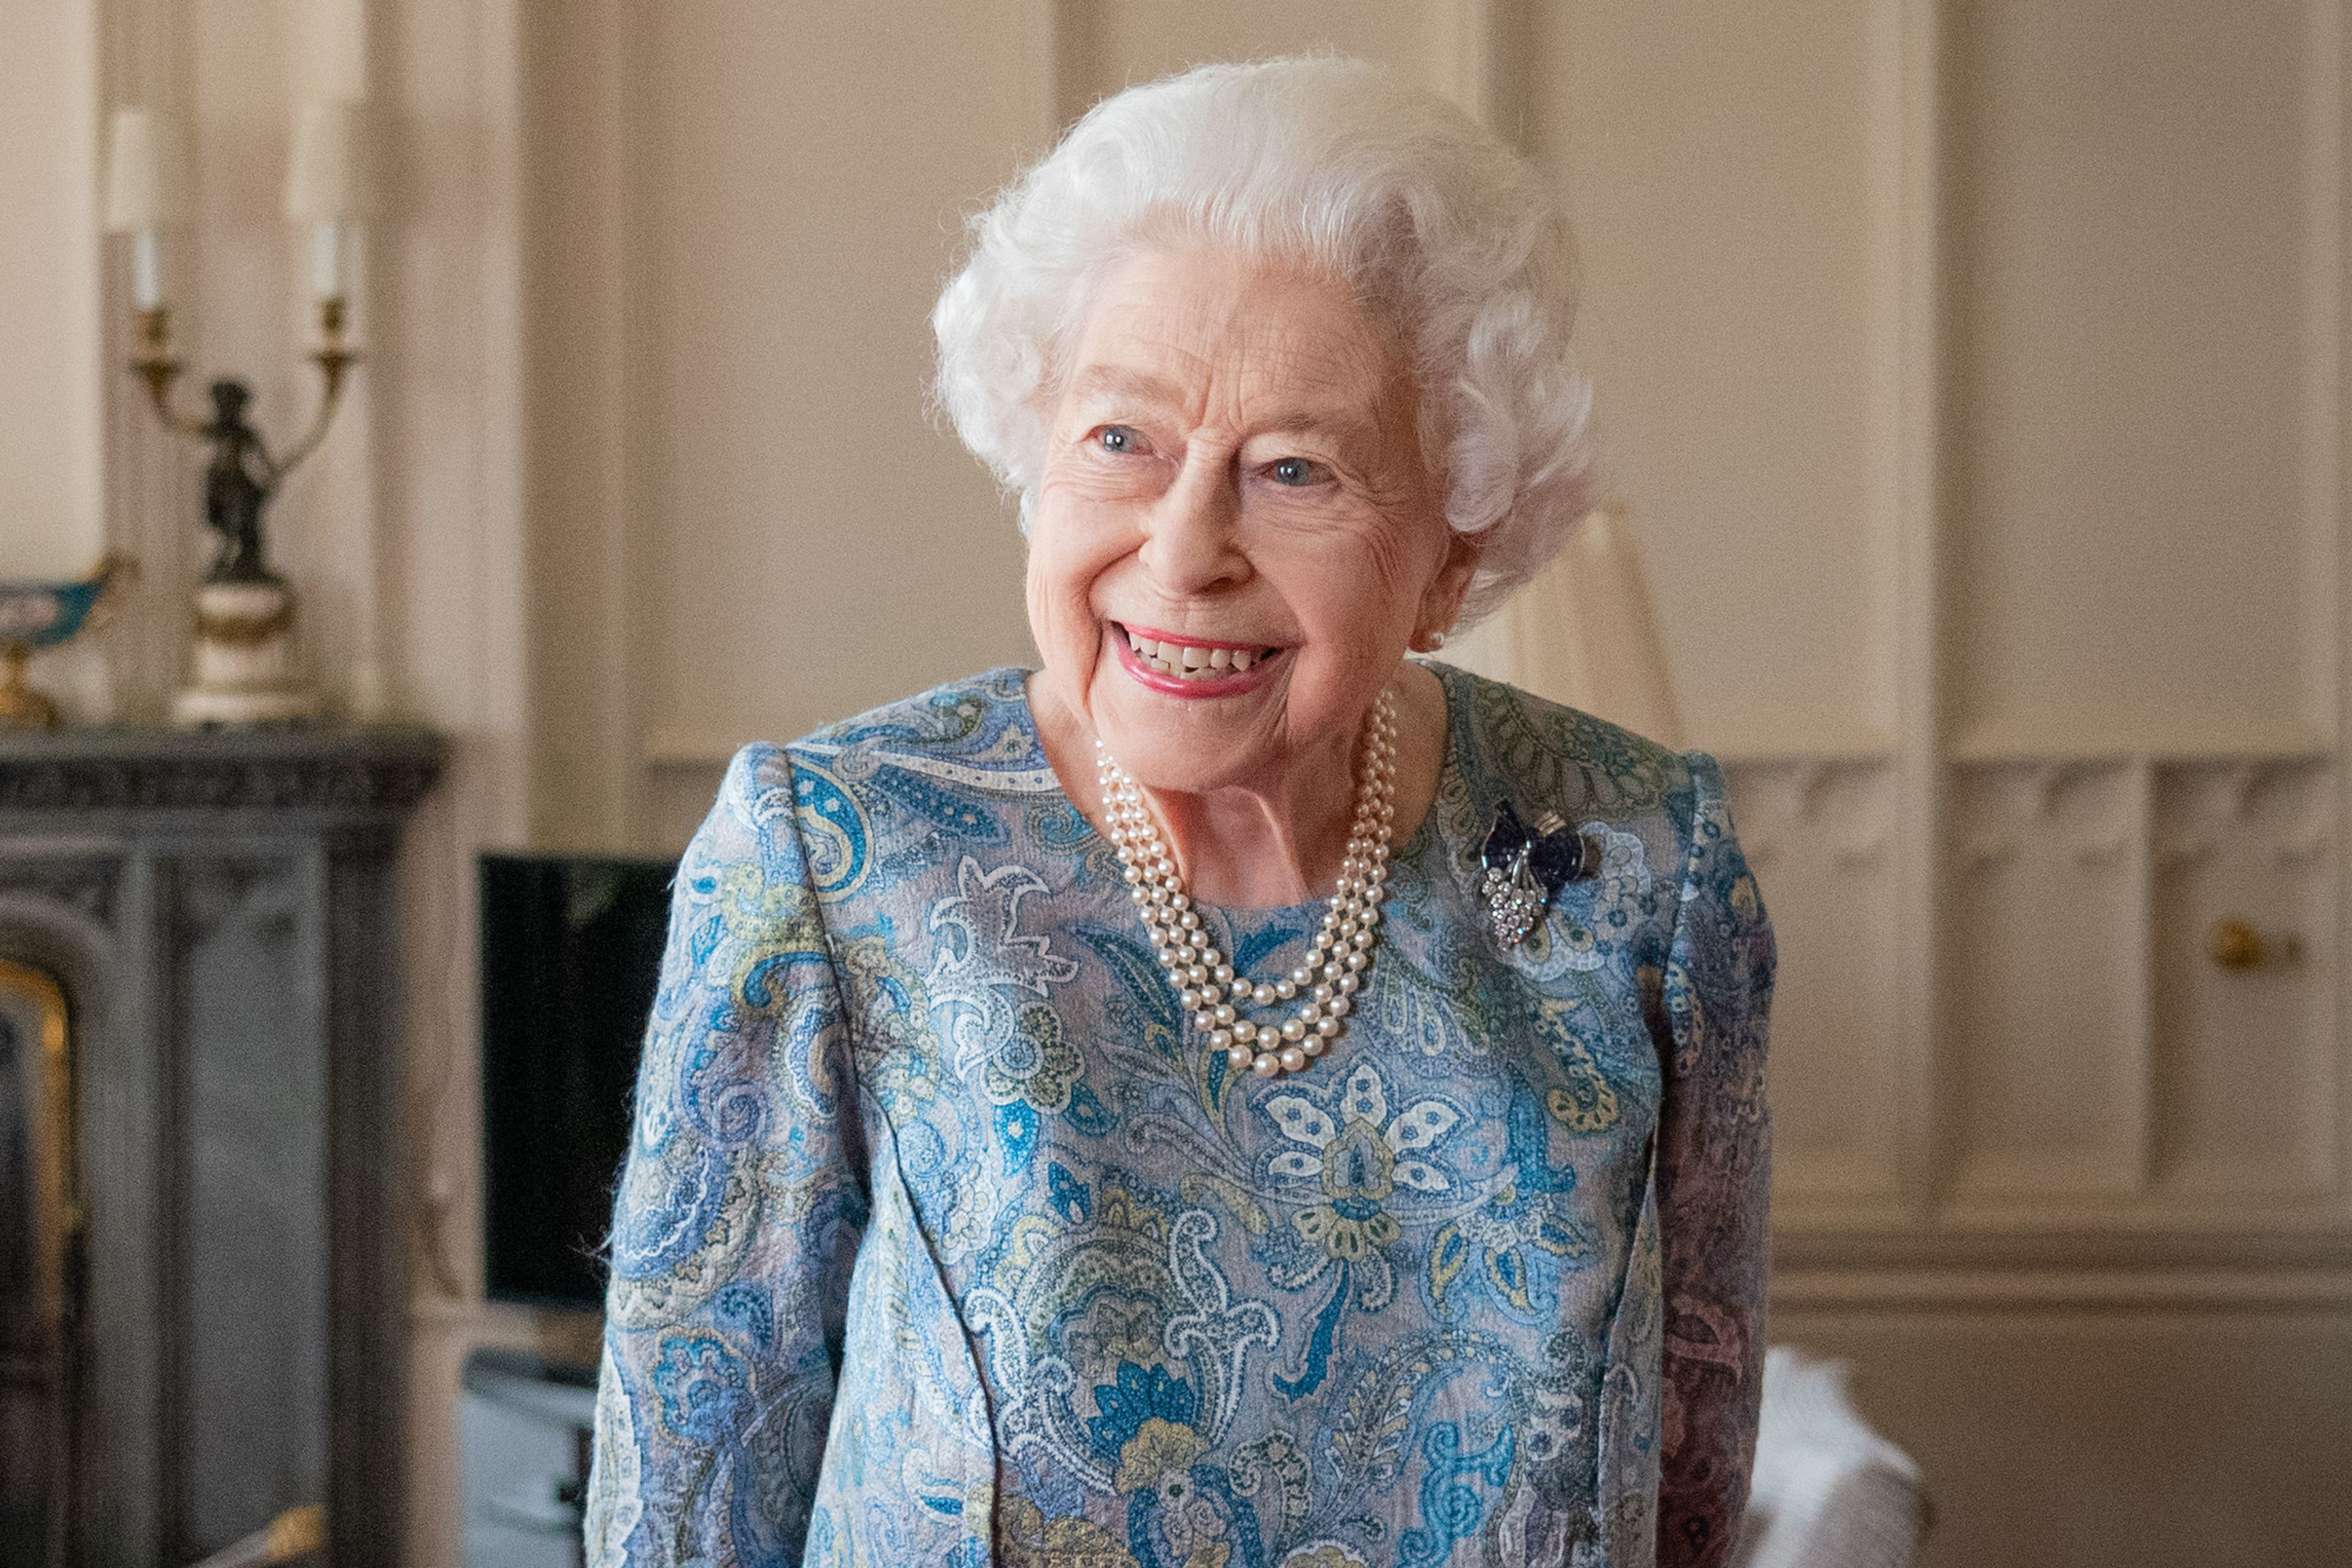 Queen Elizabeth II attends an audience at Windsor Castle on April 28, 2022 in Windsor, England. | Source: Getty Images